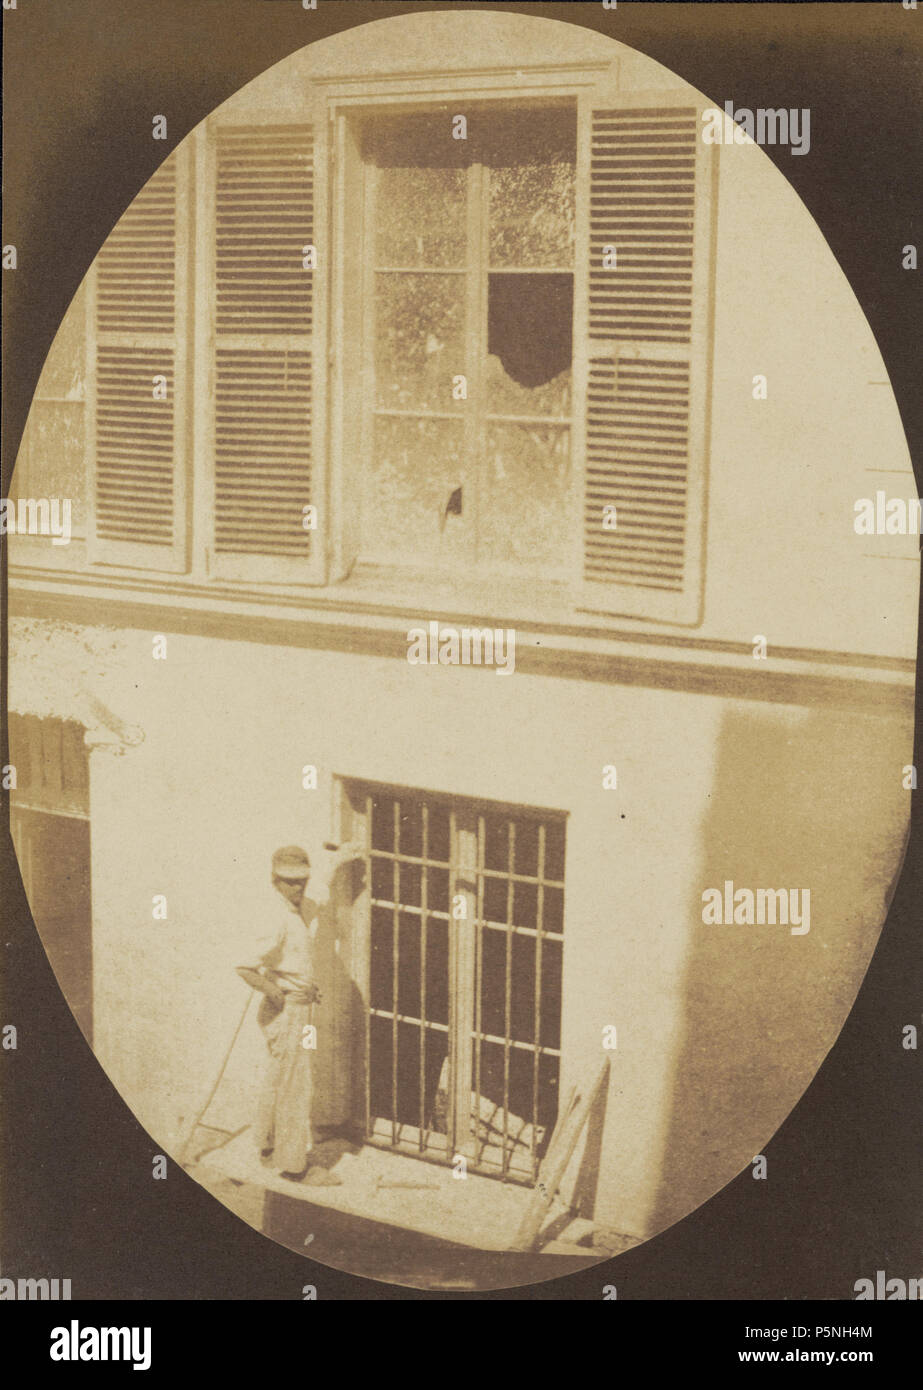 Construction Worker, Paris; Hippolyte Bayard, French, 1801 - 1887; about 1845 - 1847; Salted paper print from a Calotype negative; Image: 16.6 x 11.7 cm (6 9/16 x 4 5/8 in.), Sheet: 16.8 x 12 cm (6 5/8 x 4 3/4 in.); 84.XO.968.82 178 Bayard Construction Worker, Paris Stock Photo